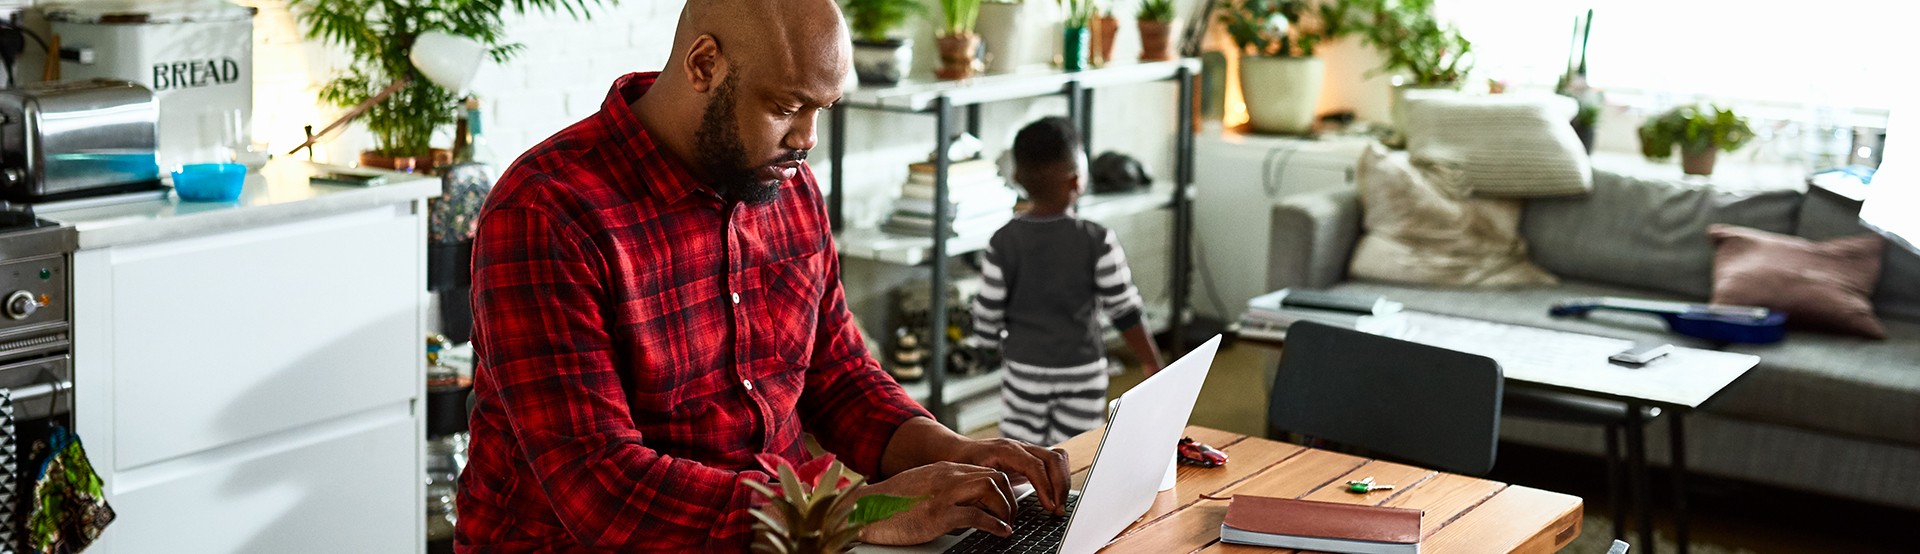 man working from home on a laptop surrounded by house plants with his son playing in the background